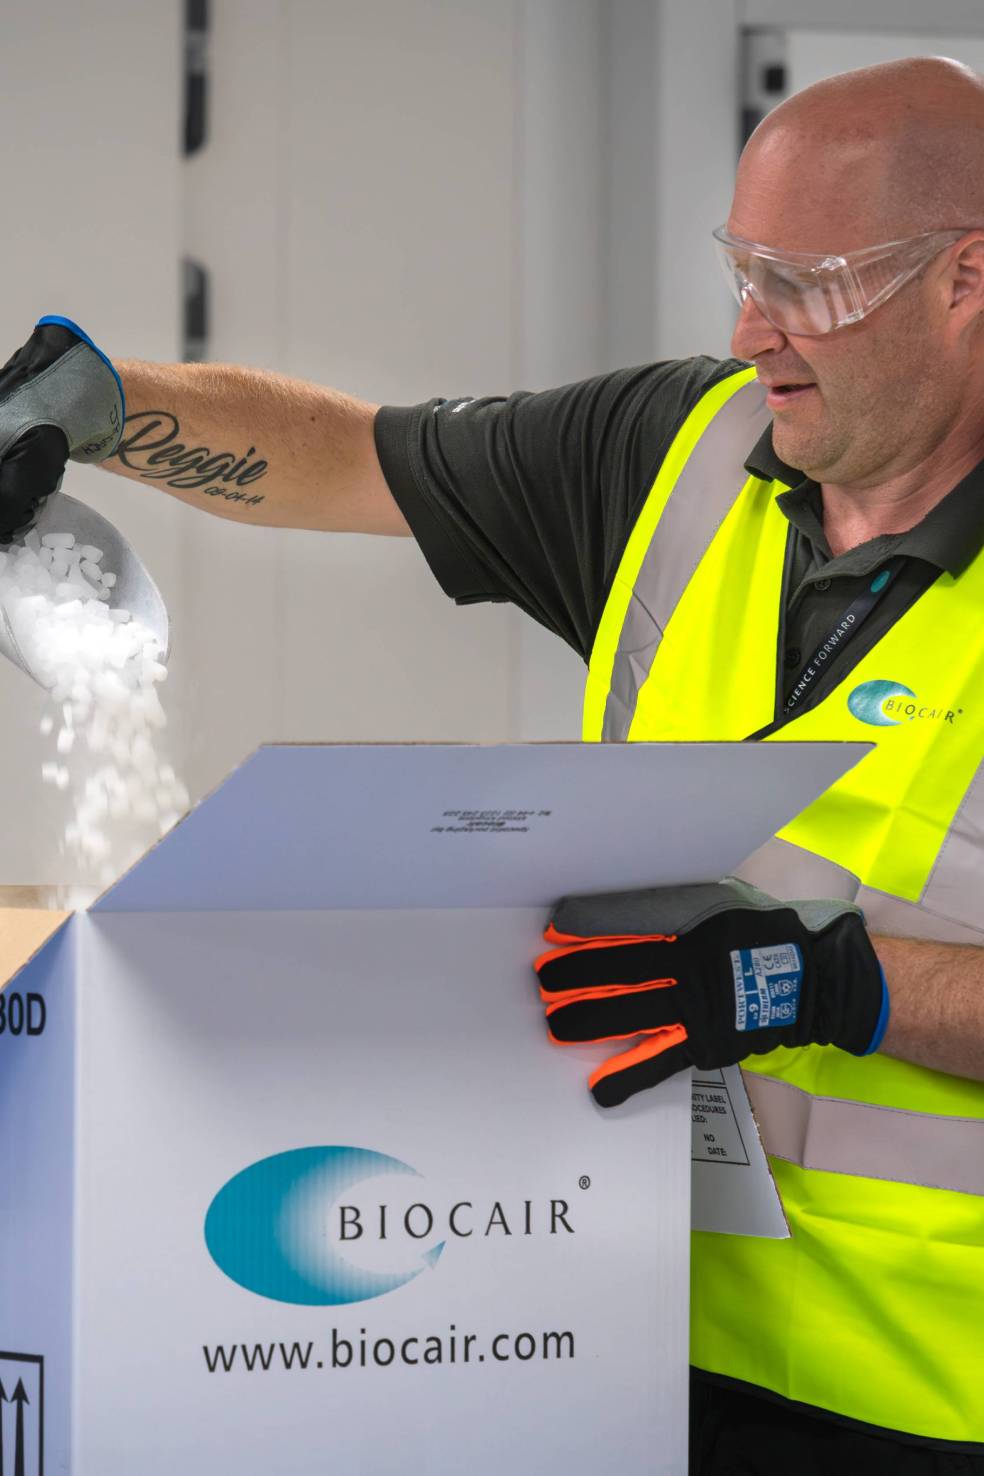 Biocair employee with box and dry ice